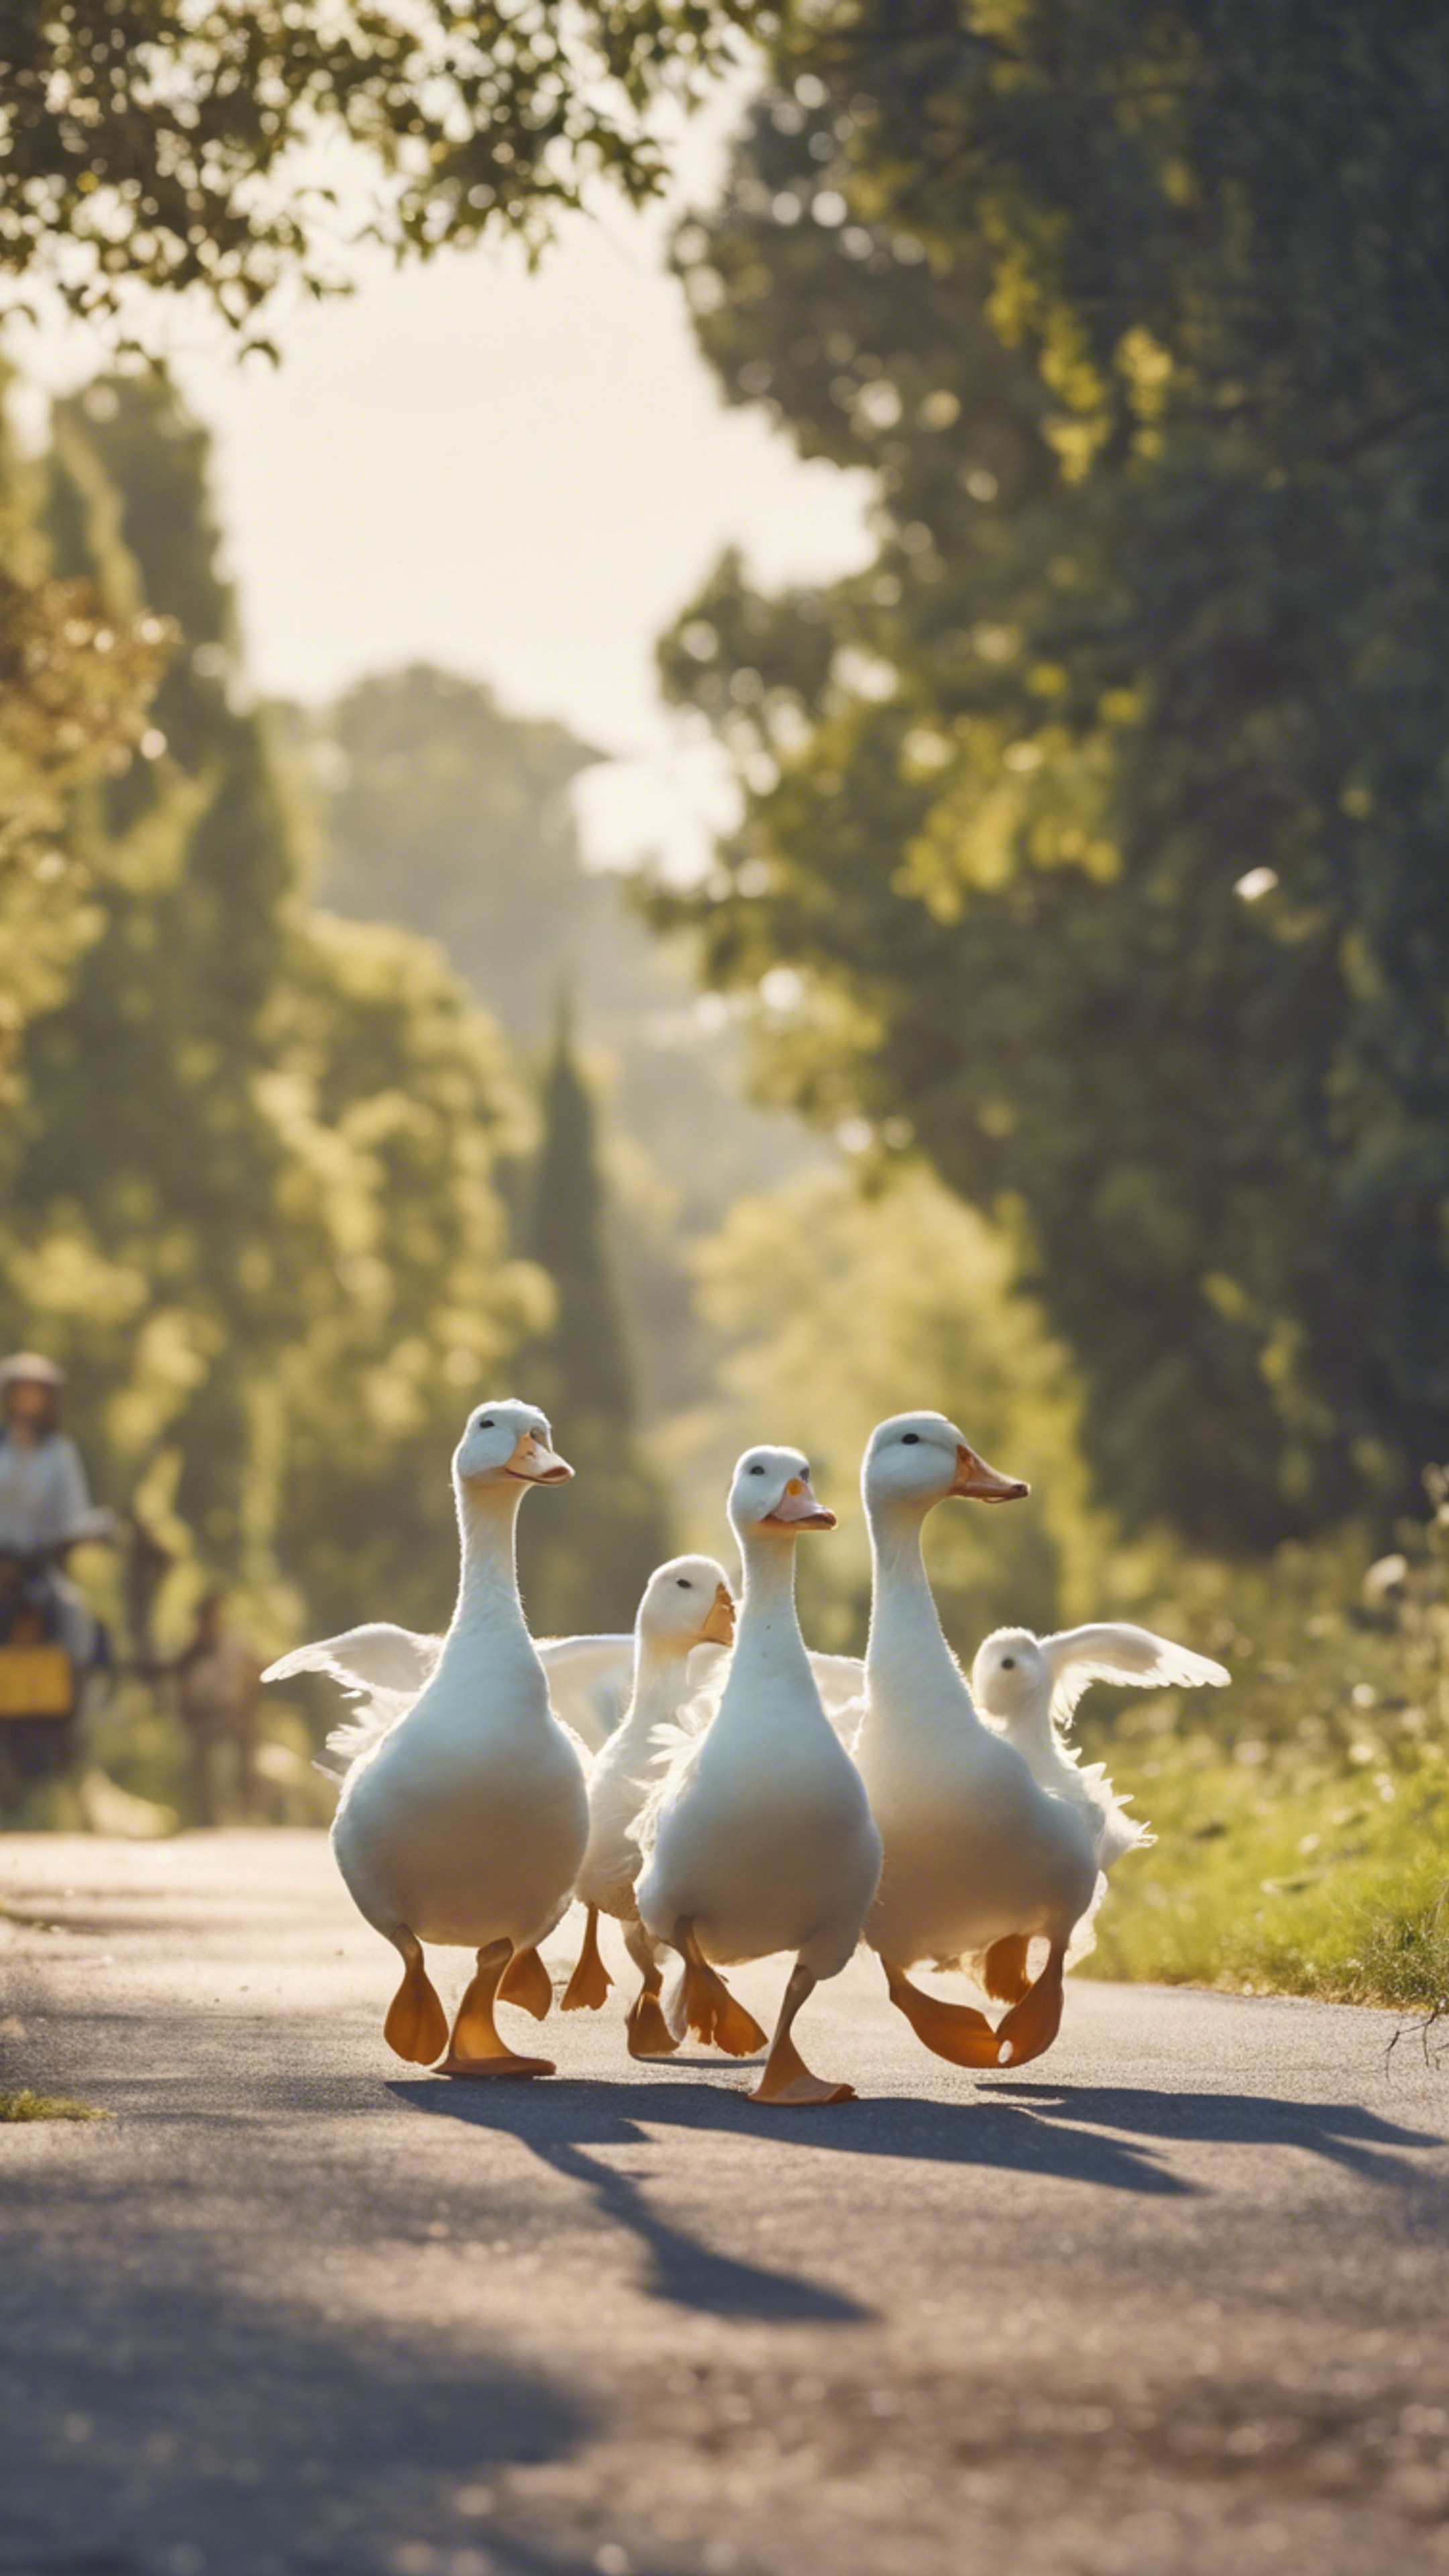 Flock of white ducks crossing a country road, led by a farm dog. Tapeta[89272549ebd8471f8754]